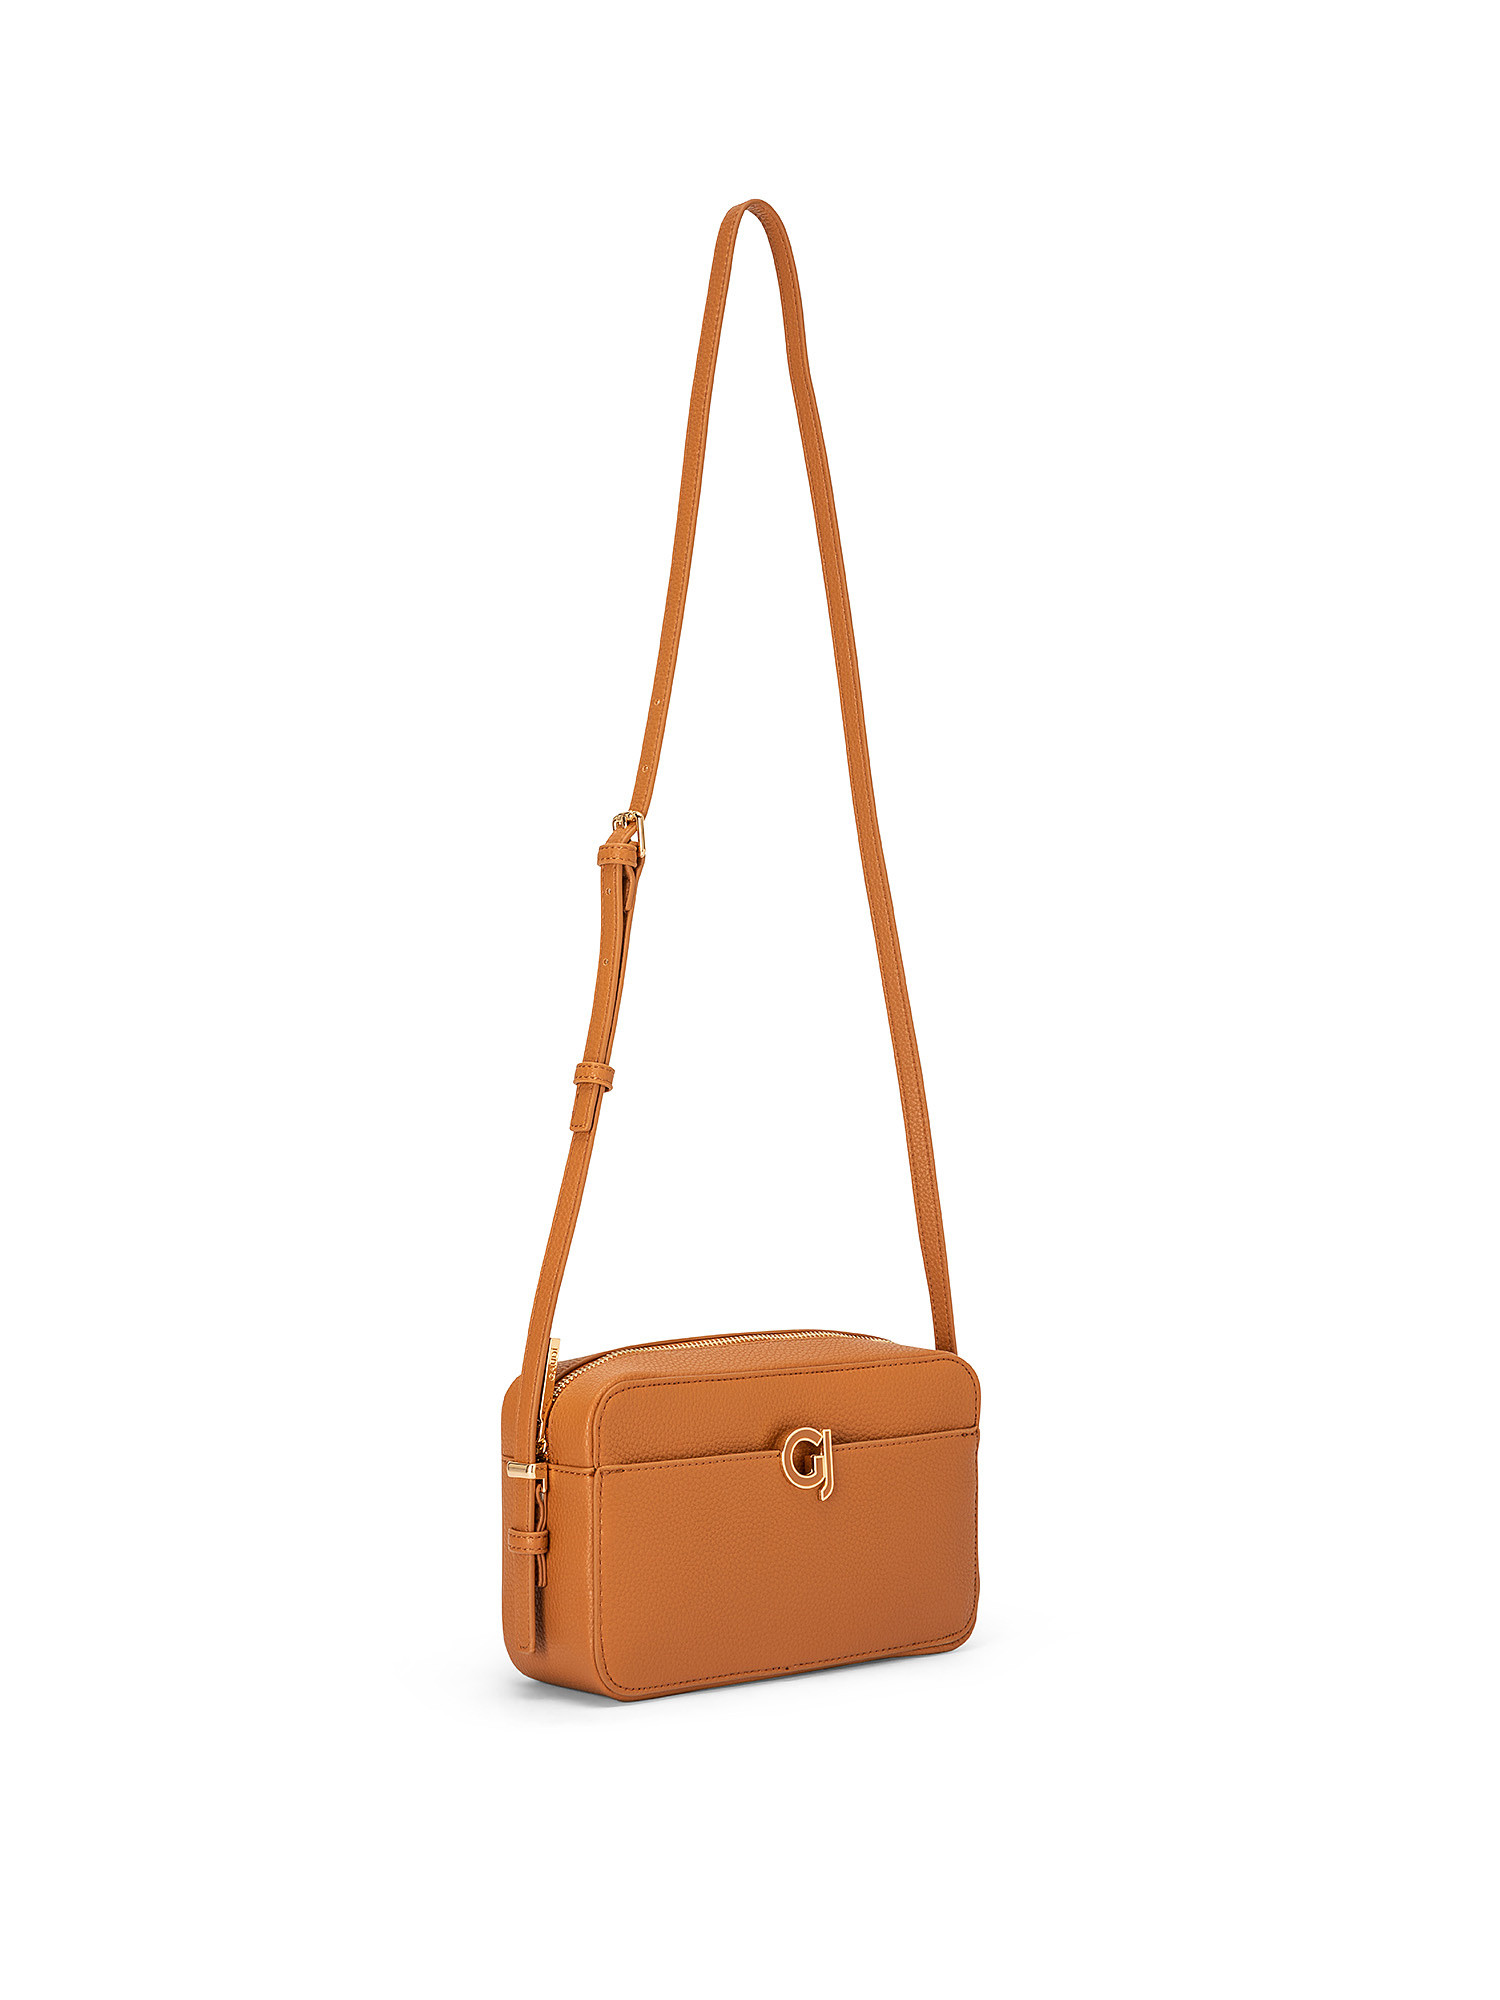 Sapphire crossbody bag, Leather Brown, large image number 1